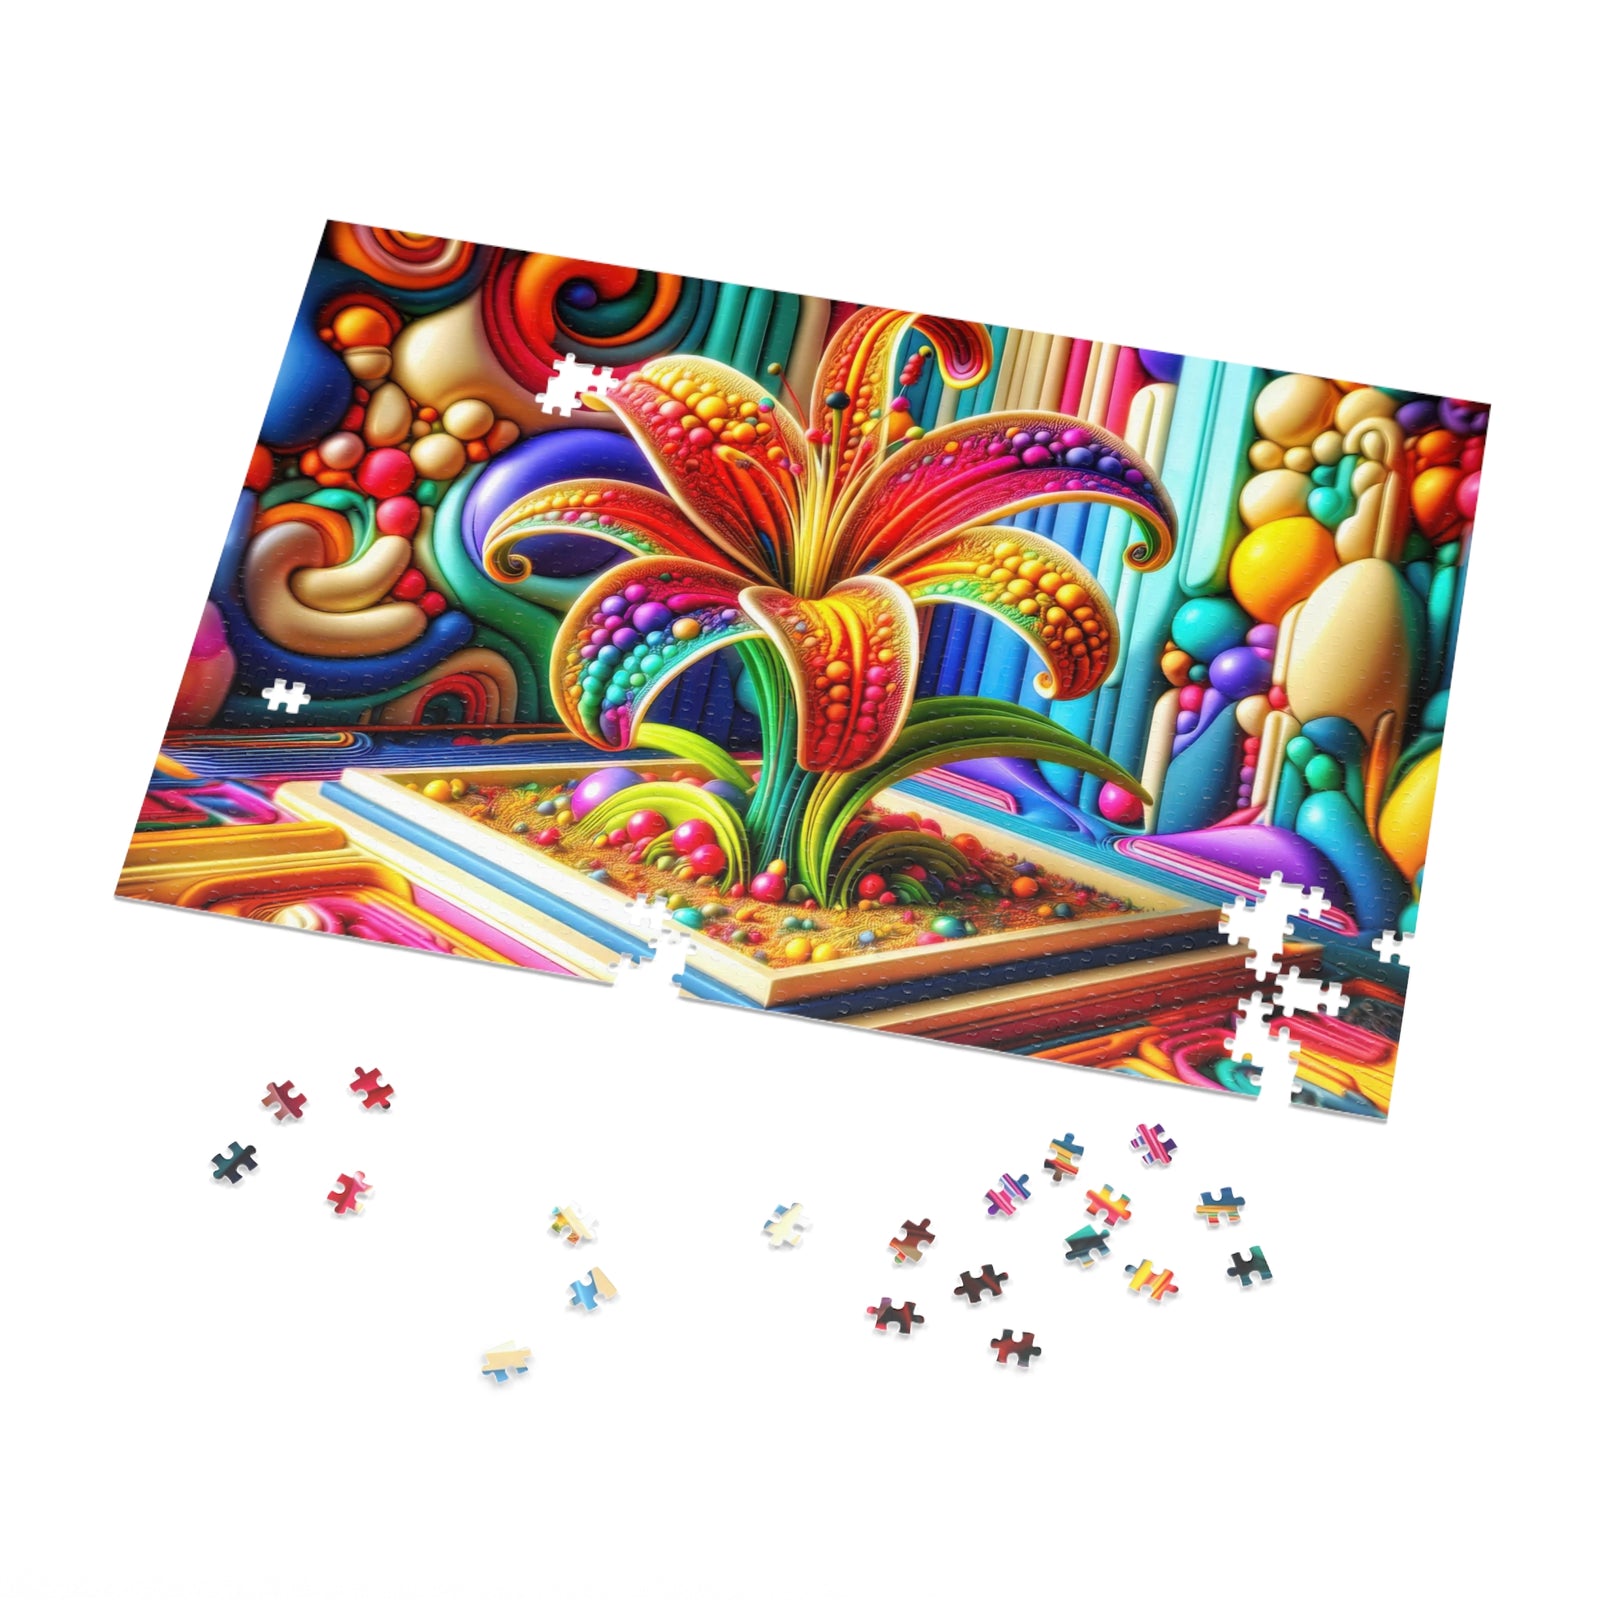 Candylicious Bloom en Whimsyland Puzzle